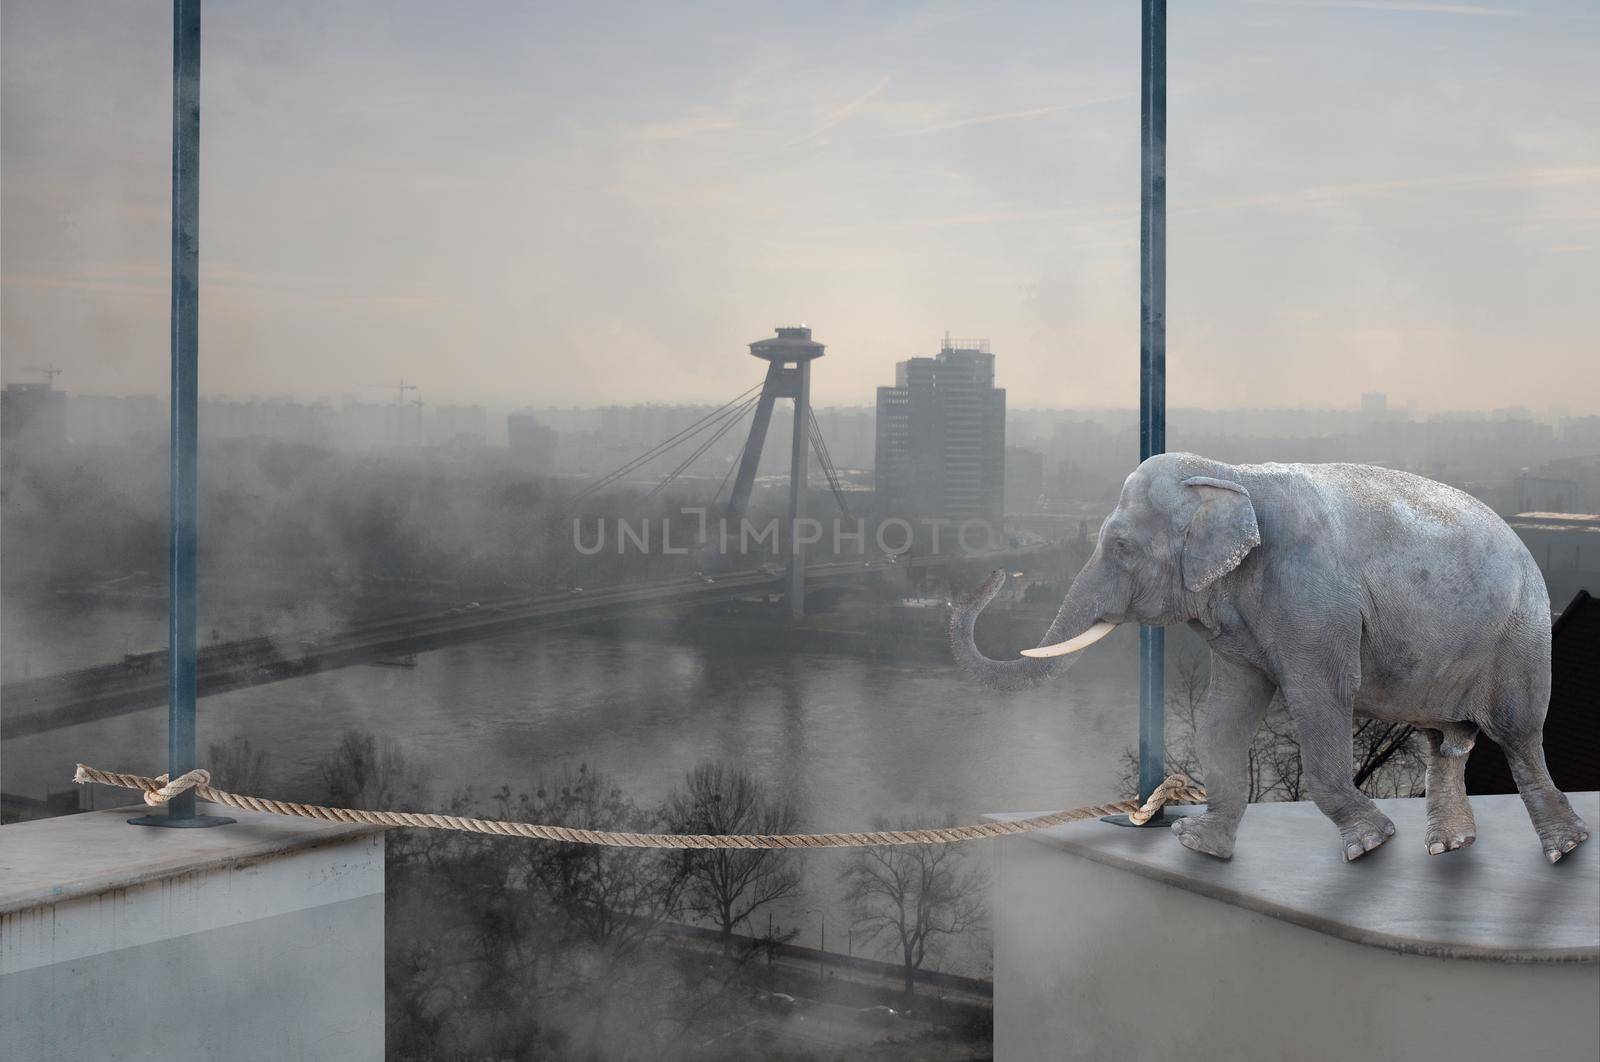 An elephant would walk safely on a hanging rope by bepsimage